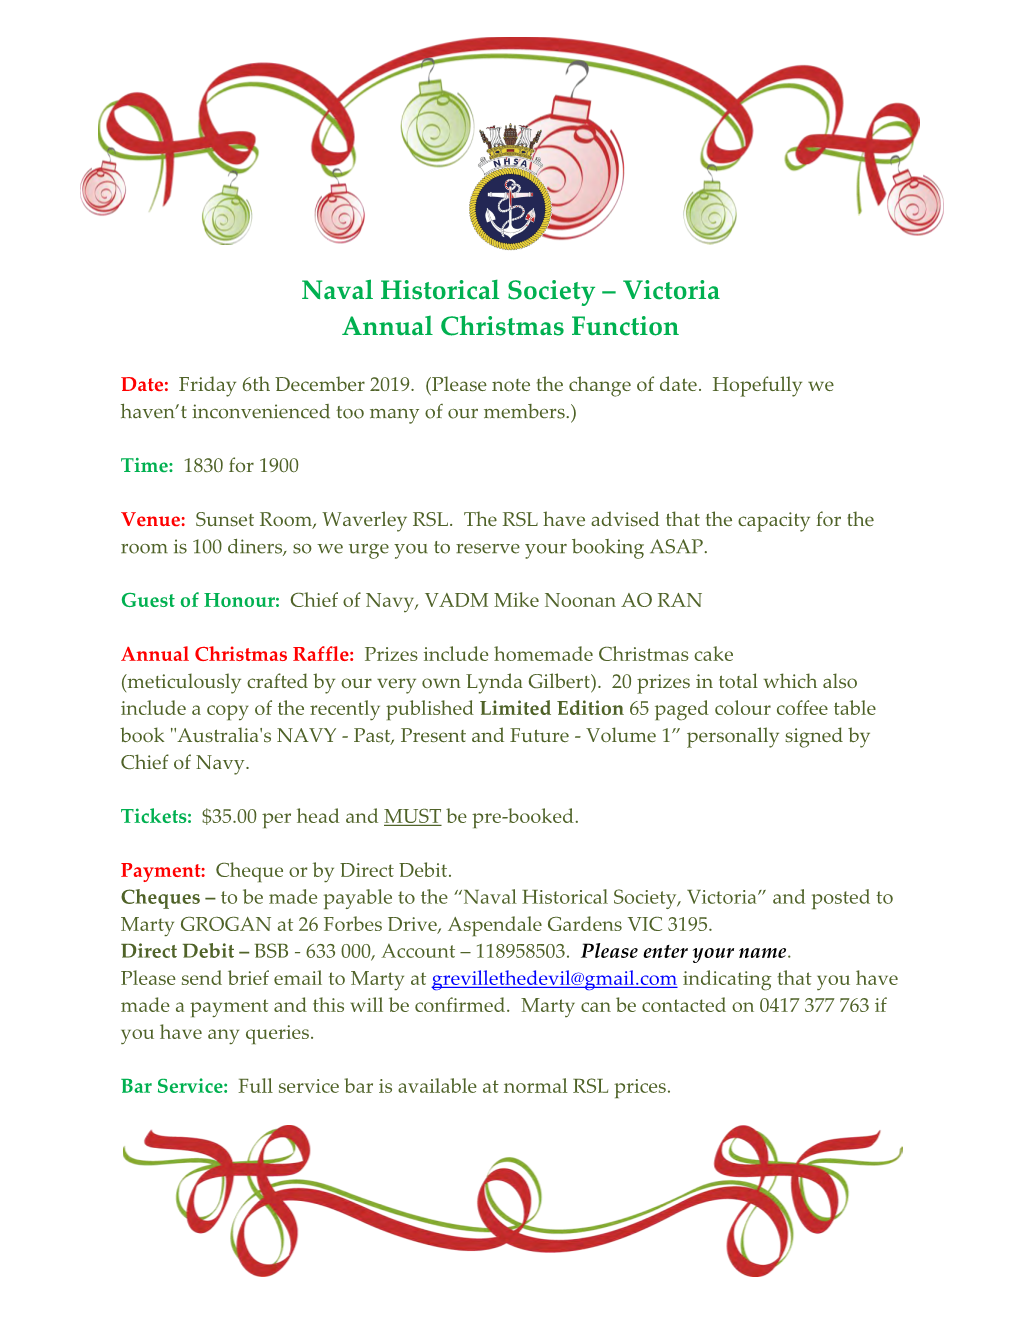 Naval Historical Society ‒ Victoria Annual Christmas Function